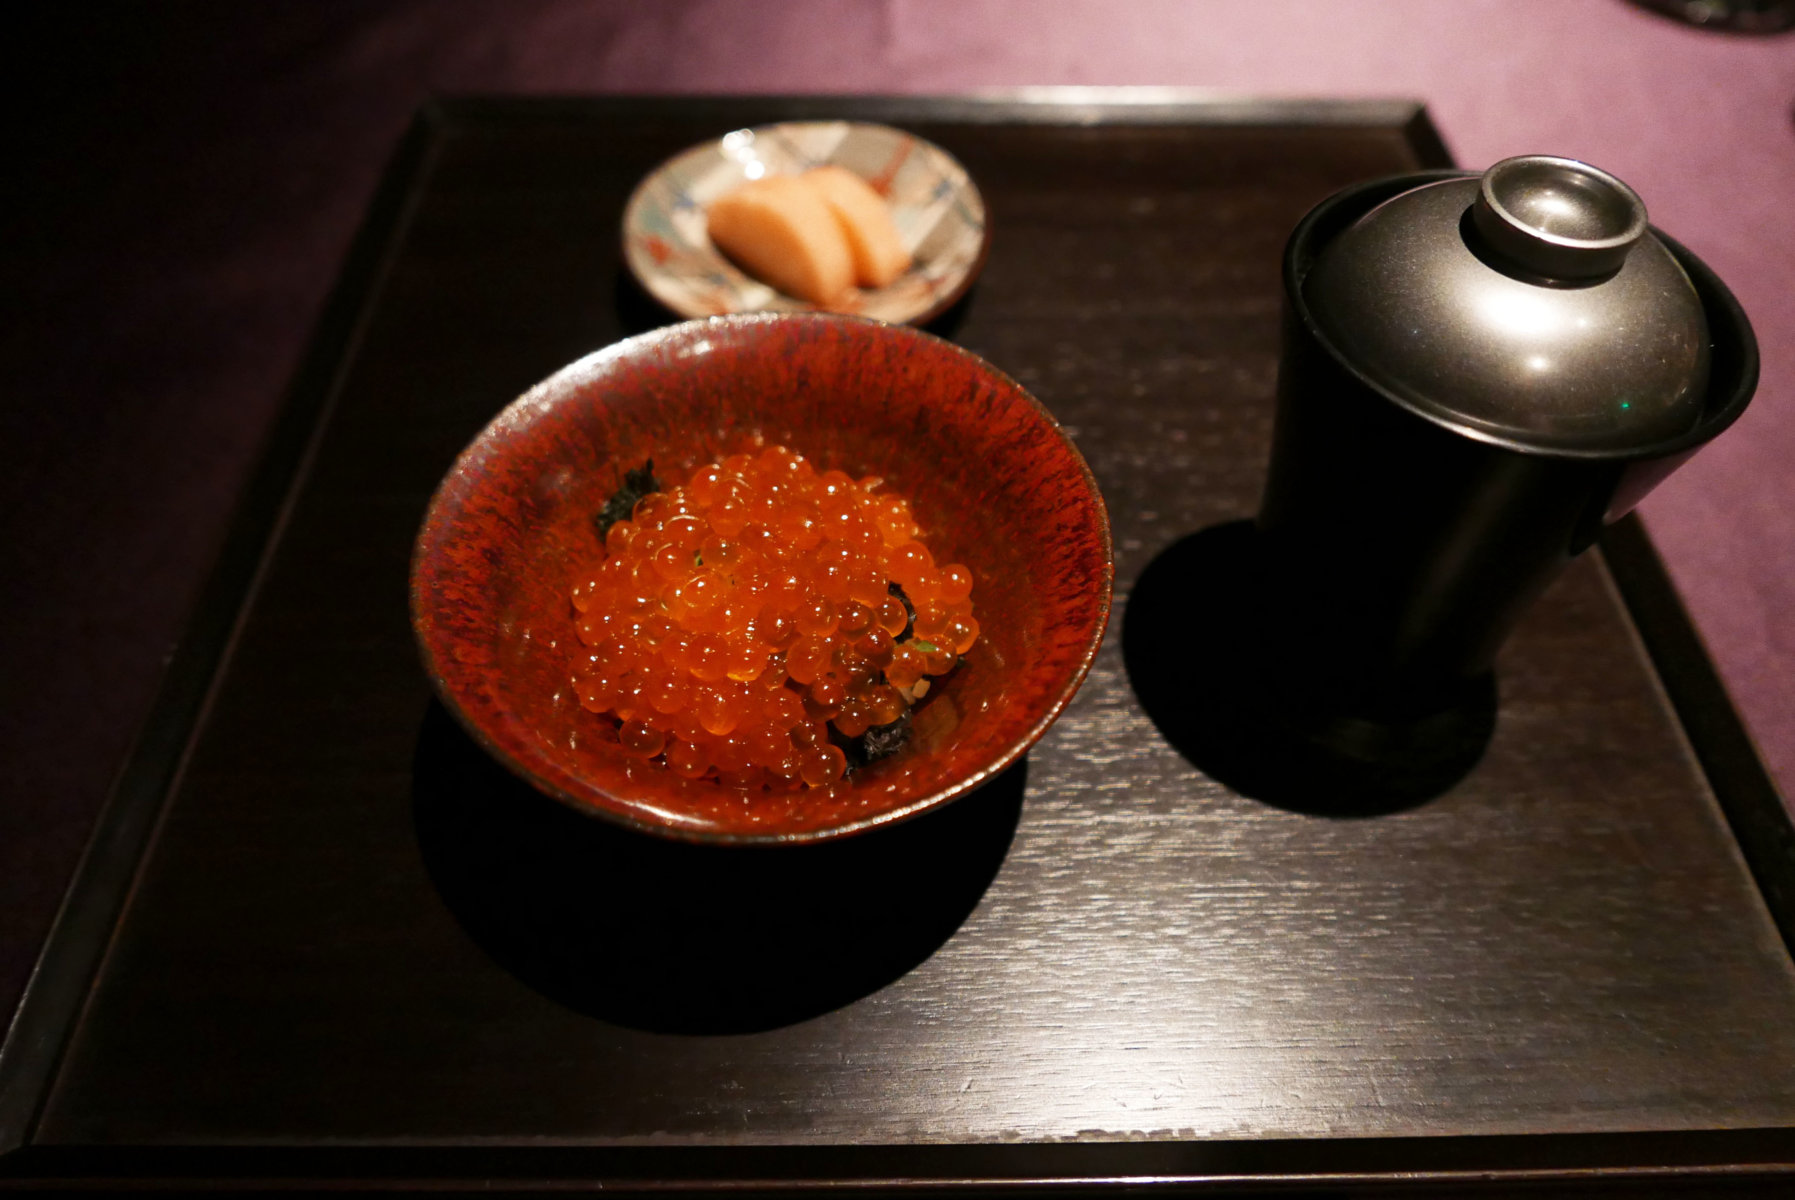 Steamed rice with ikura (salmon roe), miso soup, pickles